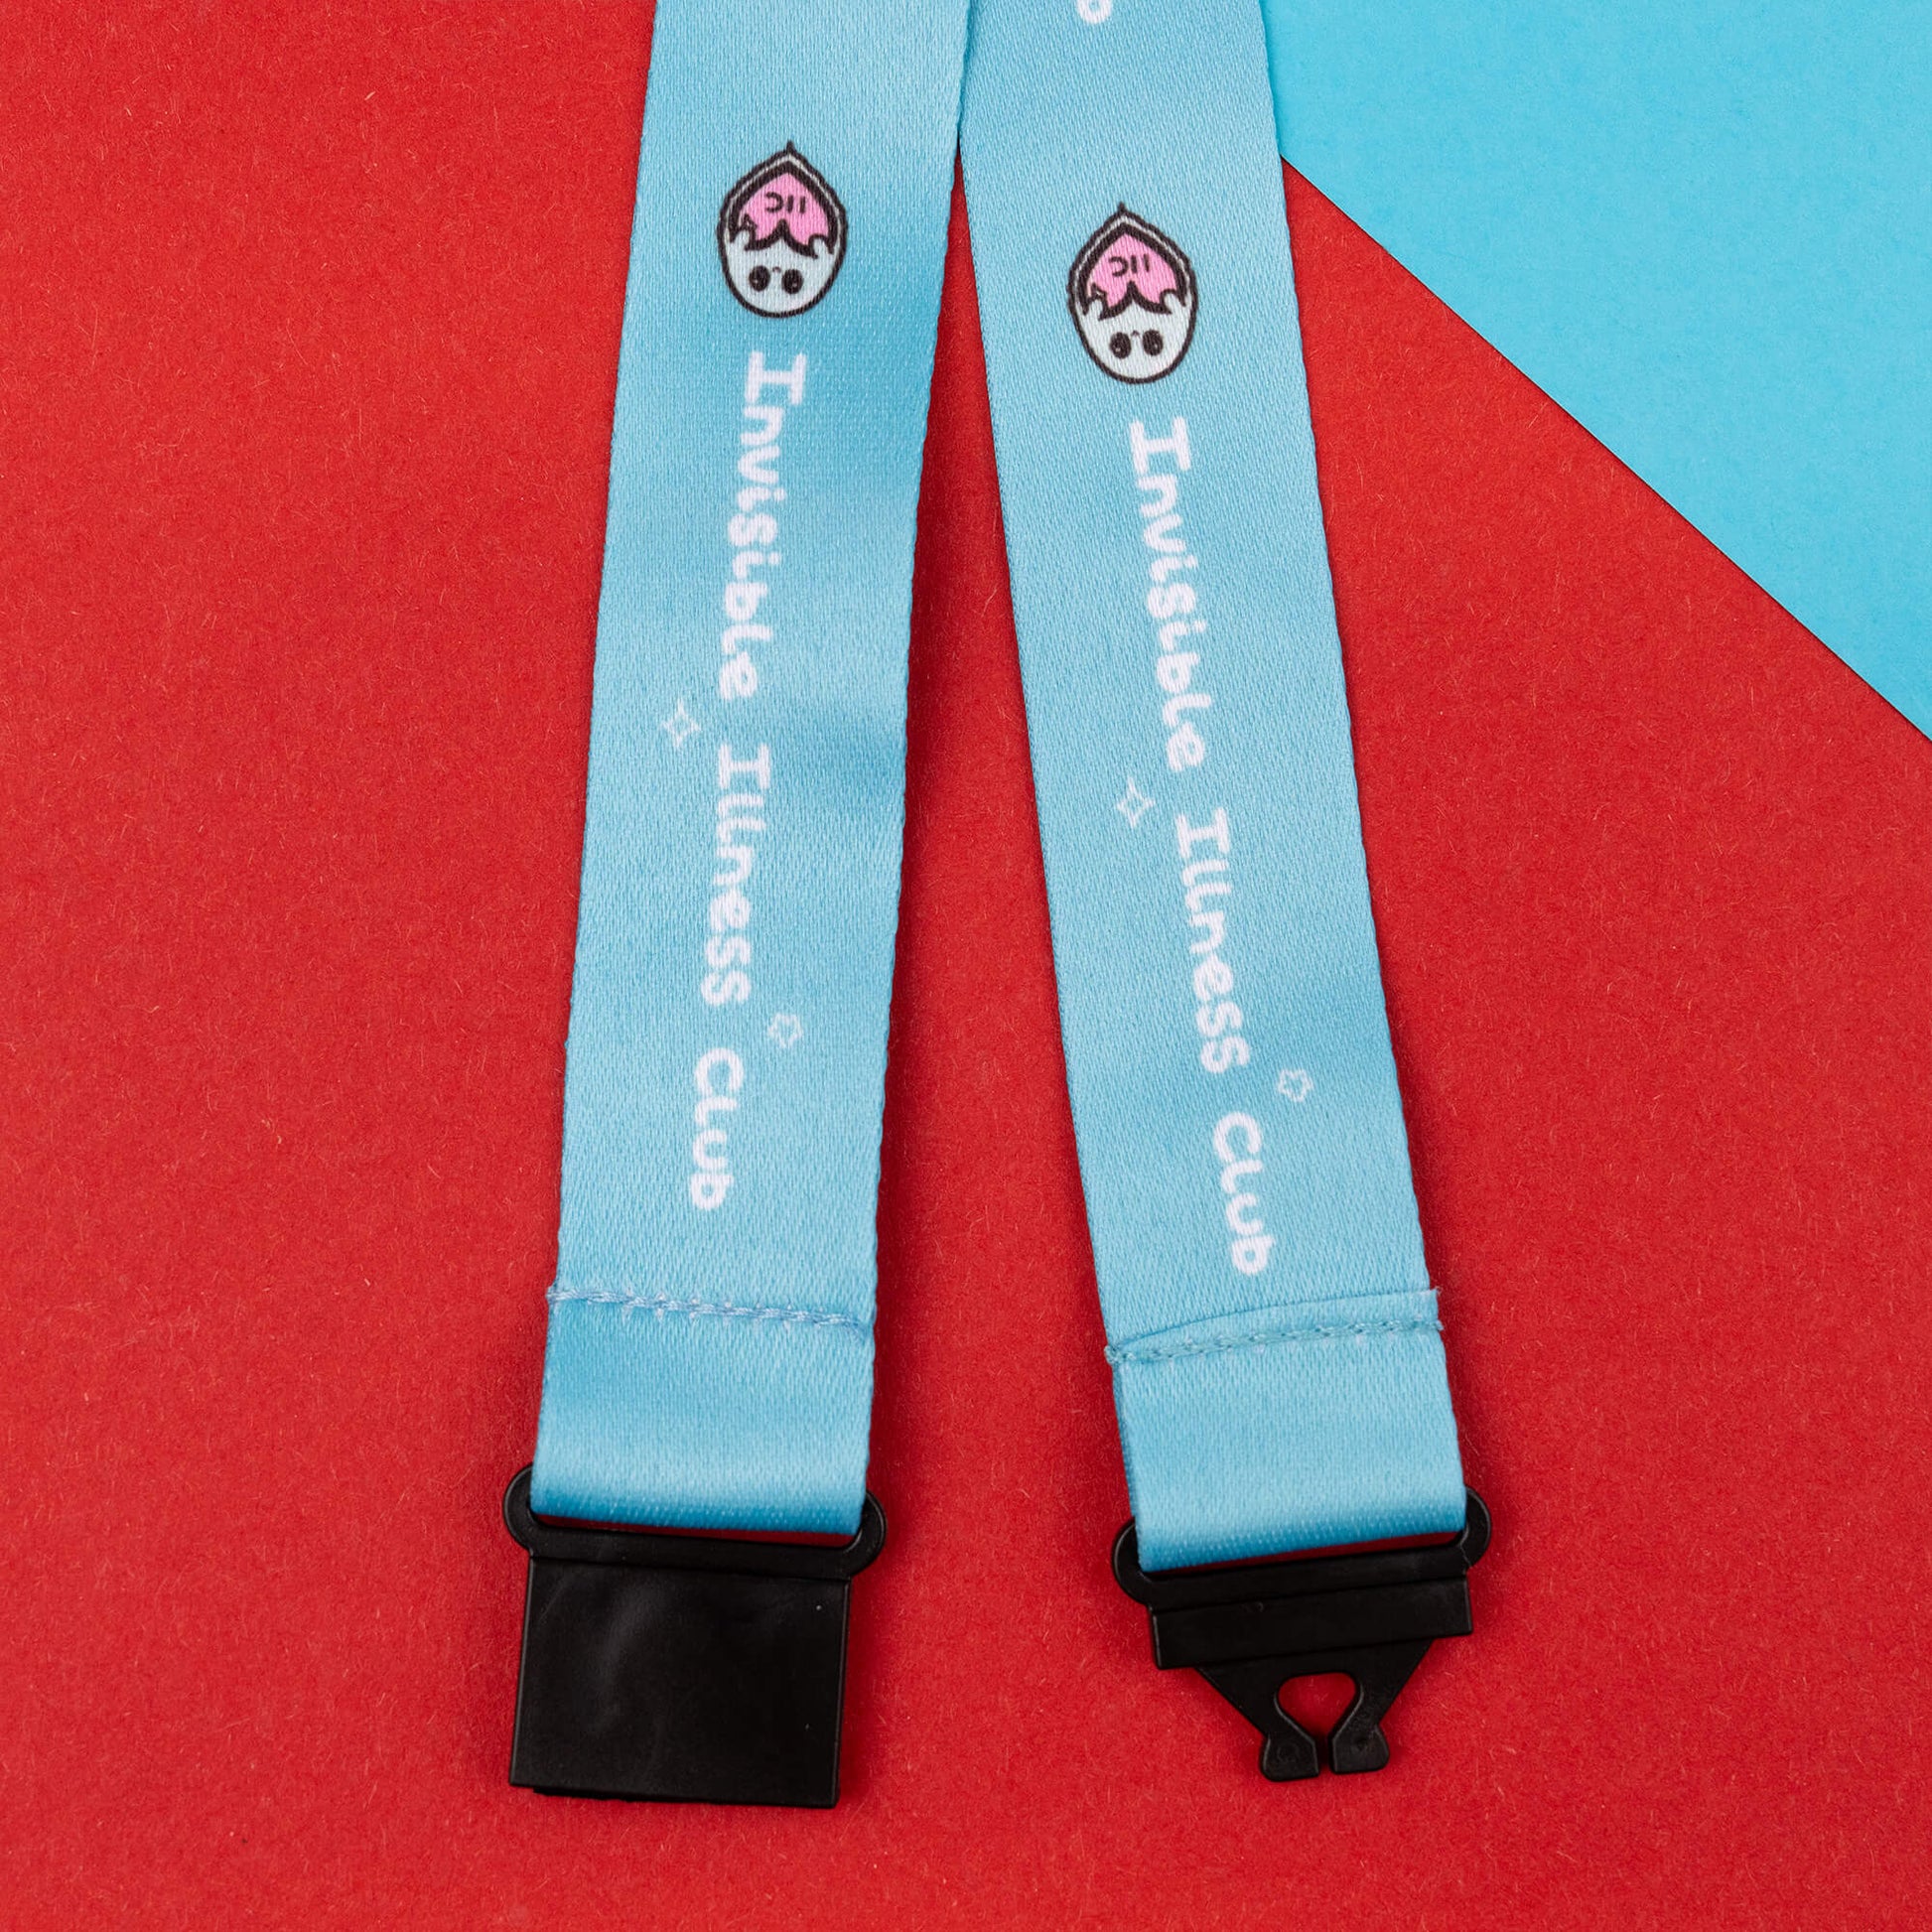 Close-up of a light blue lanyard with black safety catches, featuring the 'Invisible Illness Club' text and a whimsical ghost logo. Designed to raise awareness for invisible illnesses, it is laid out on a red and blue geometric background.